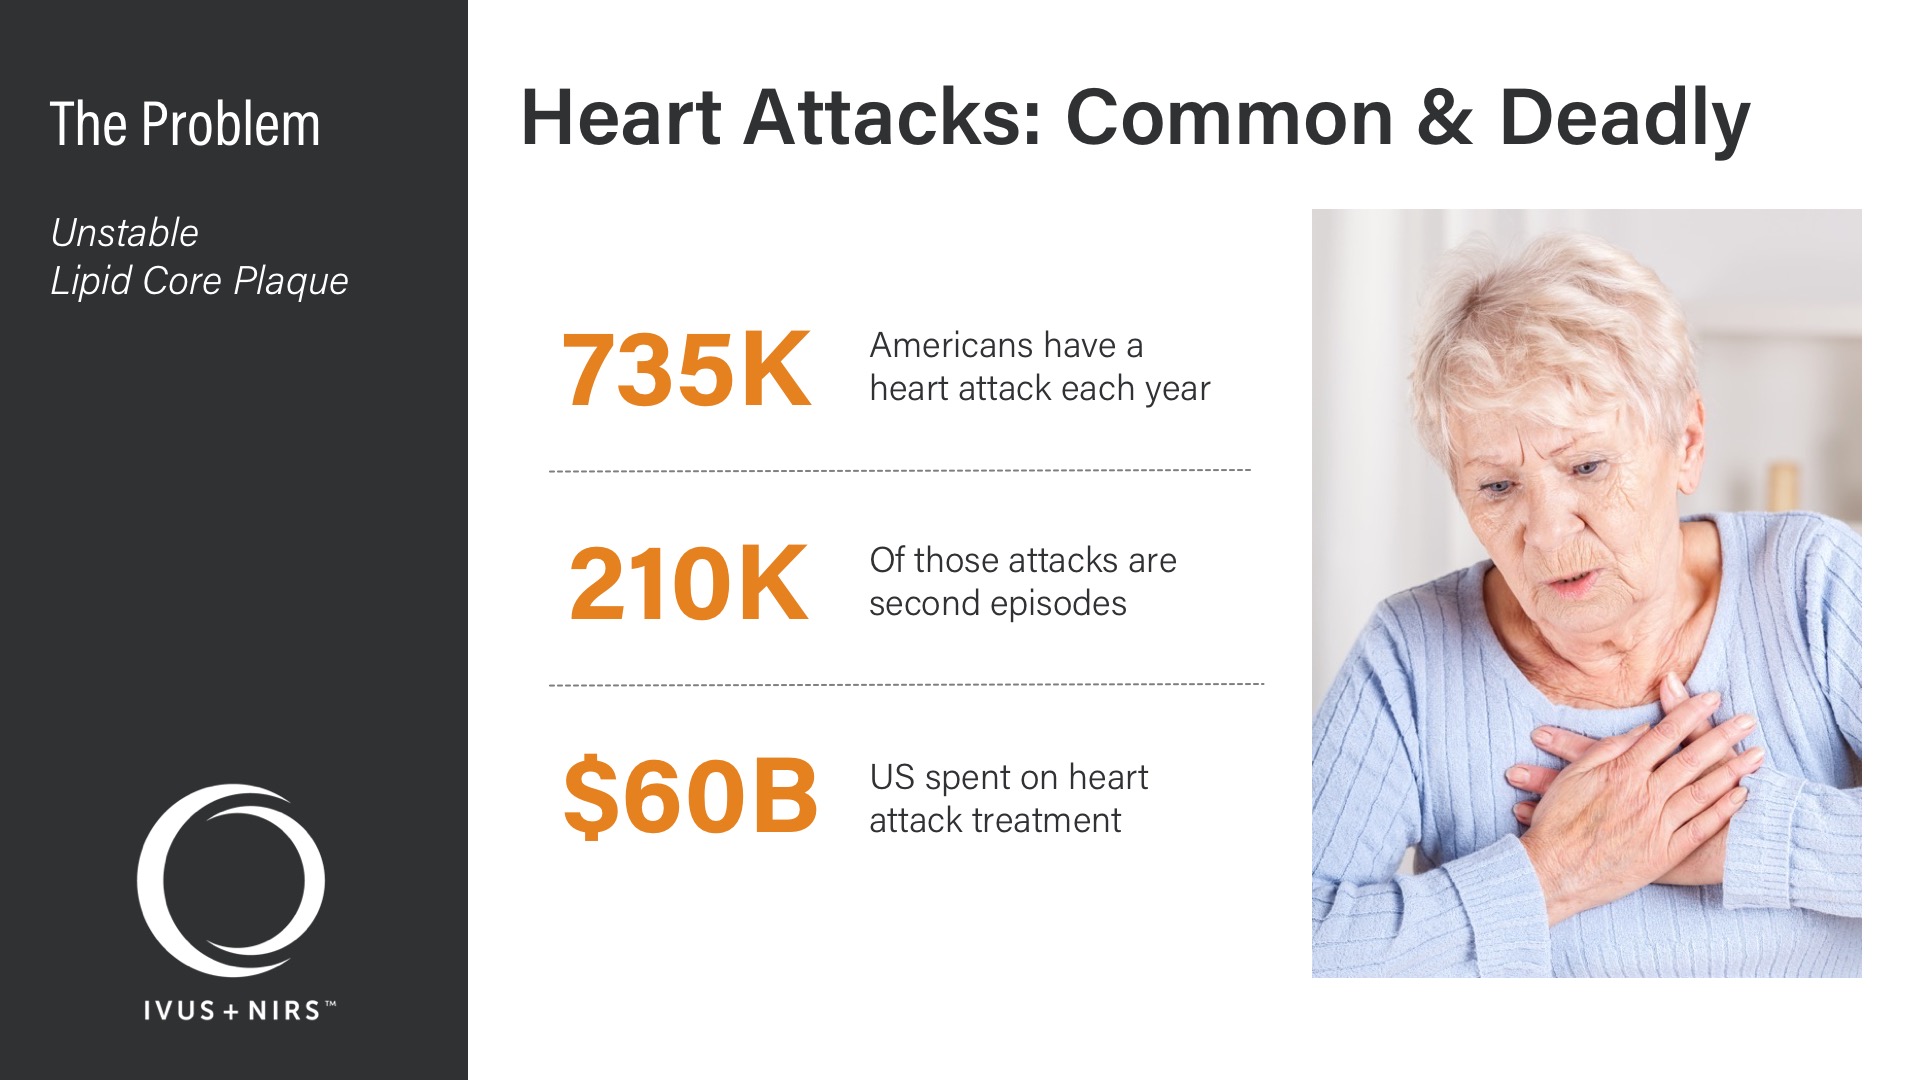 Infraredx Corporate Deck - Problem - Heart Attacks: Common & Deadly